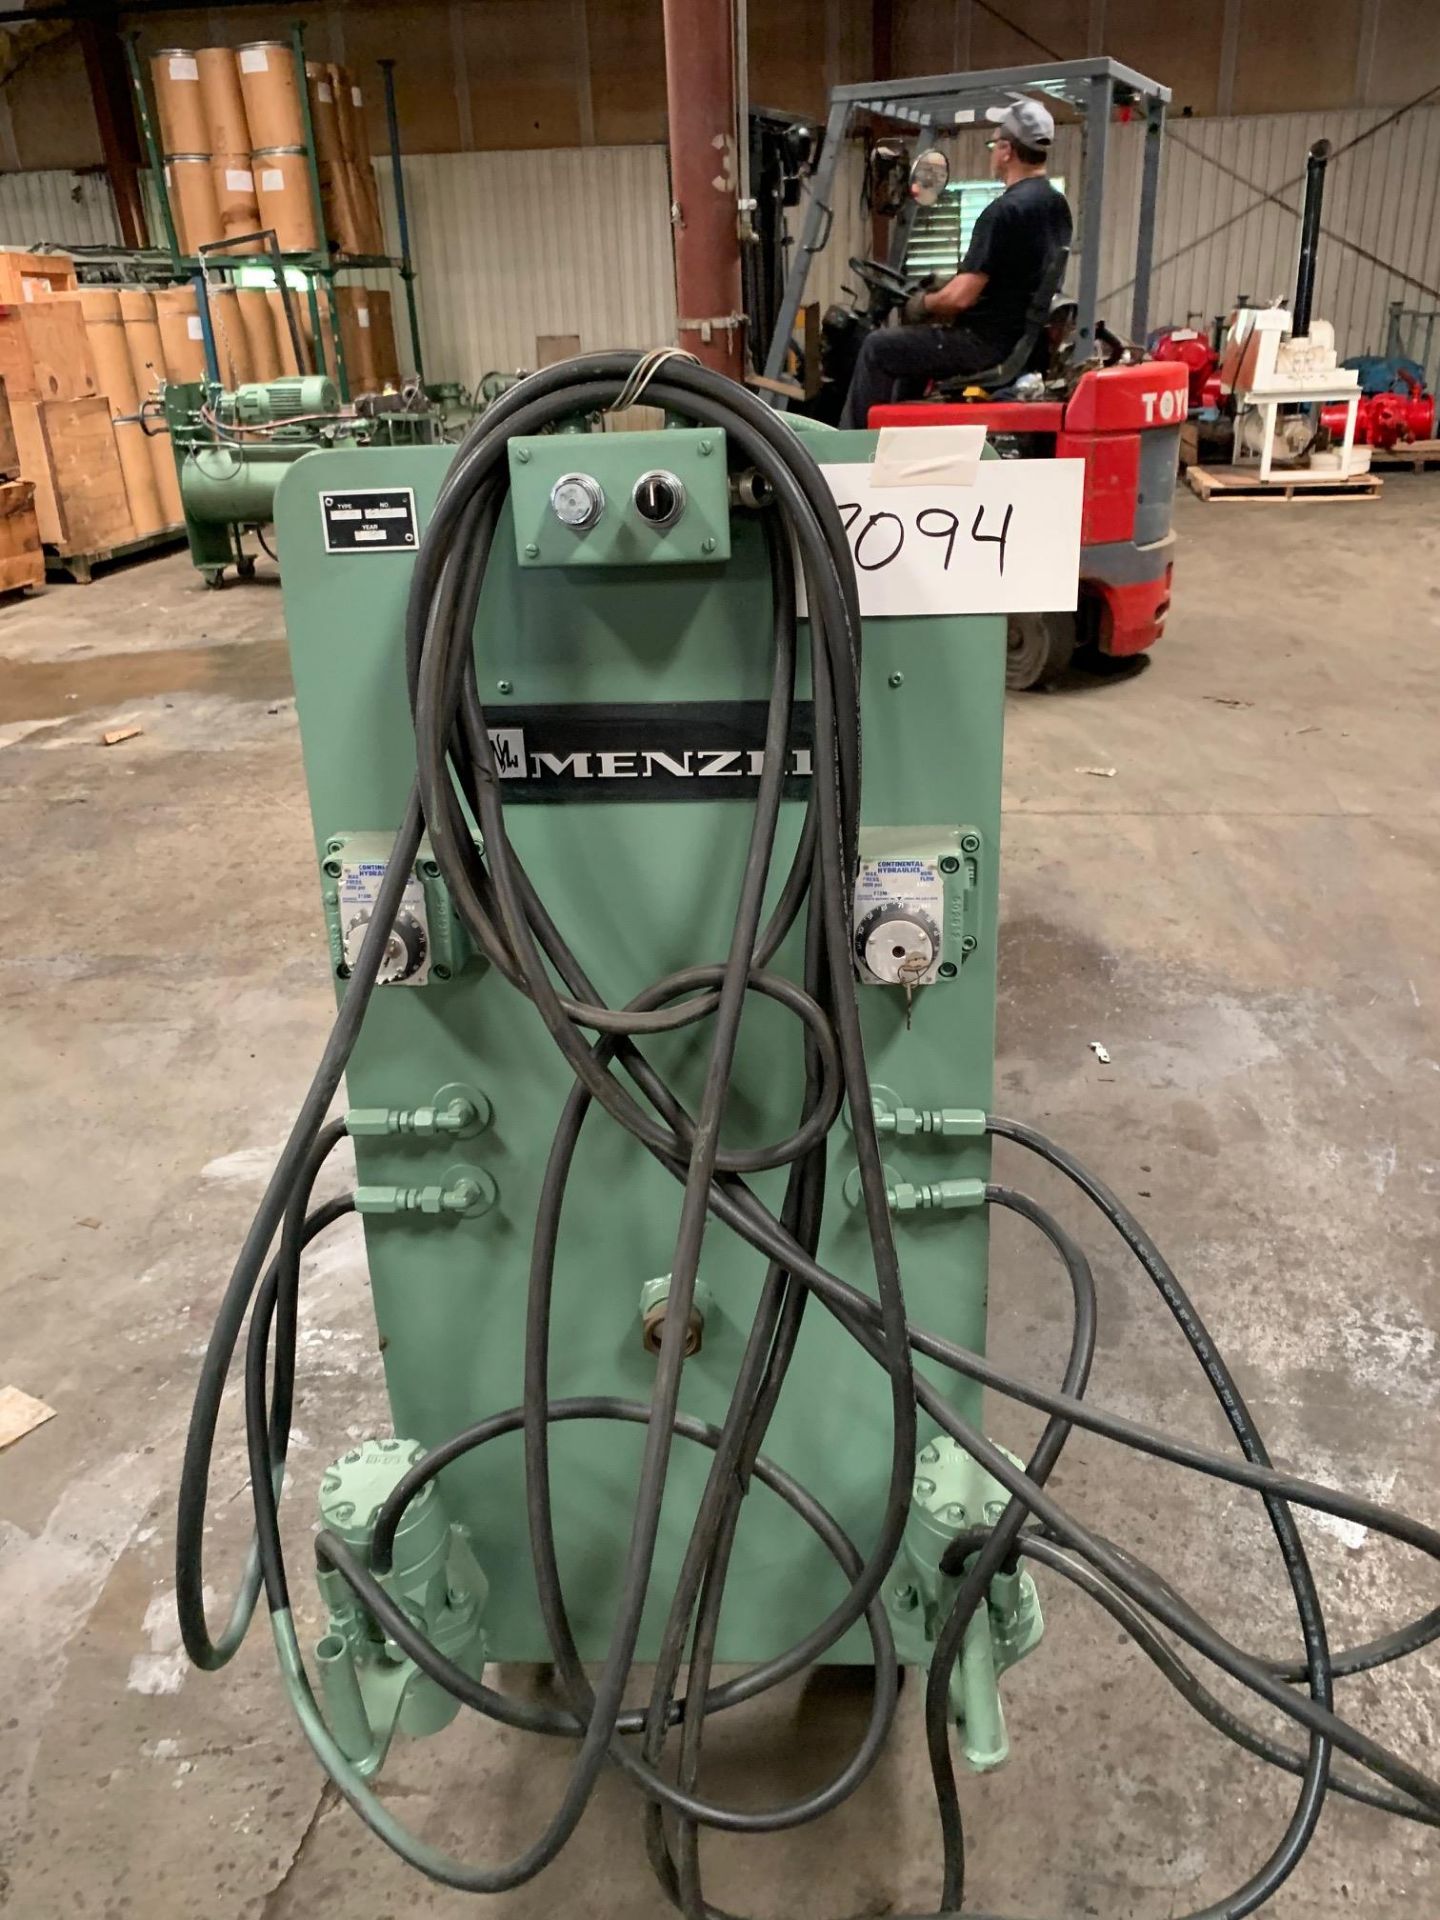 Menzel Hydraulic units double motor model STB 220/460 Volts Serial 02451 , Rigging Fee: $25 - Image 5 of 7